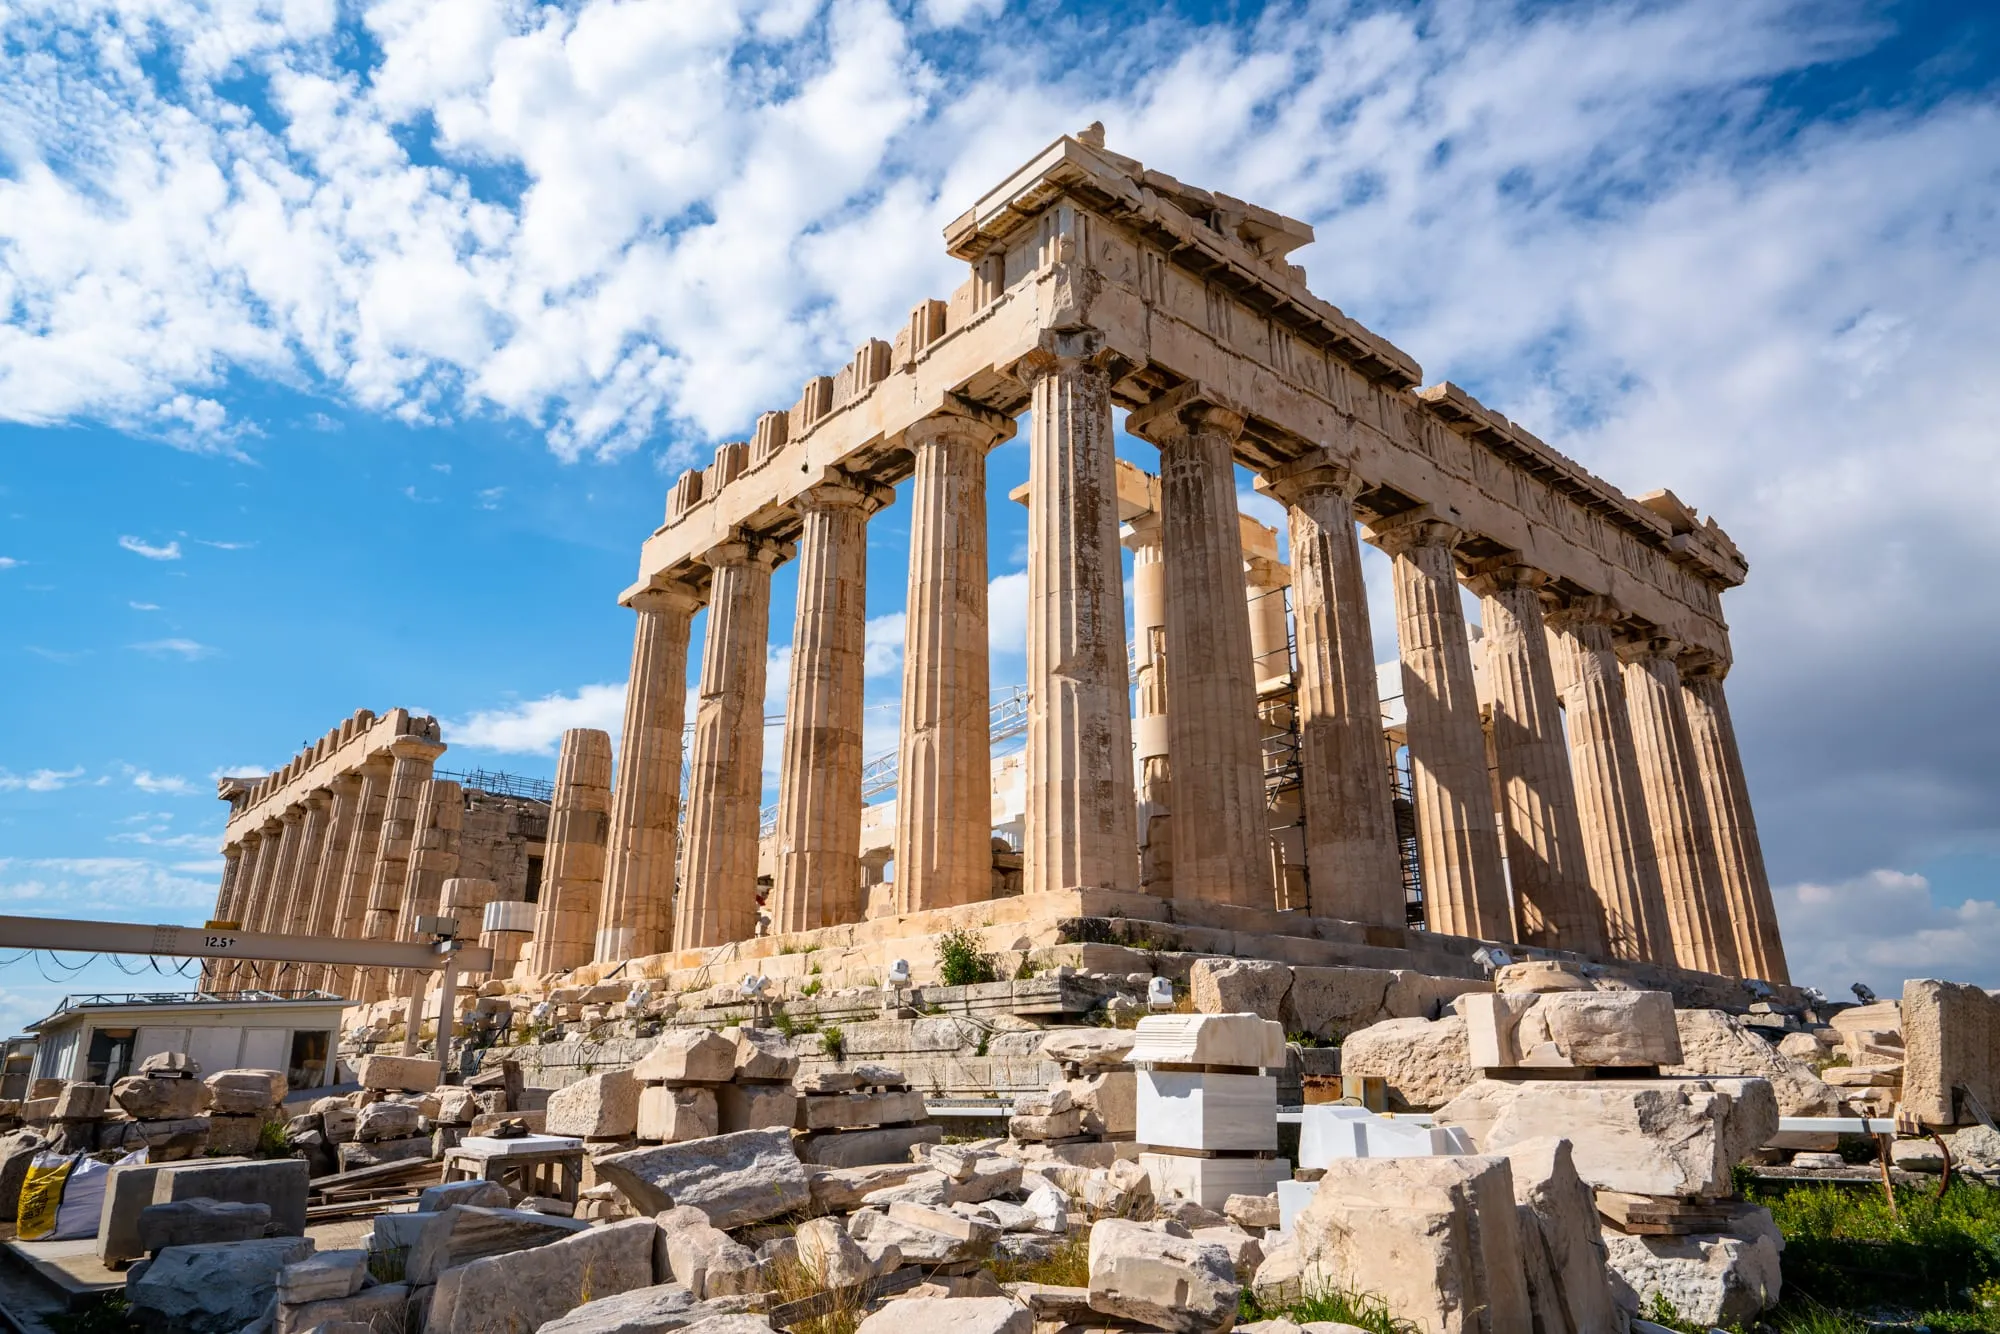 Athens Parthenon--if your dream trip includes this view, your choice between visiting Greece or Croatia is clear!